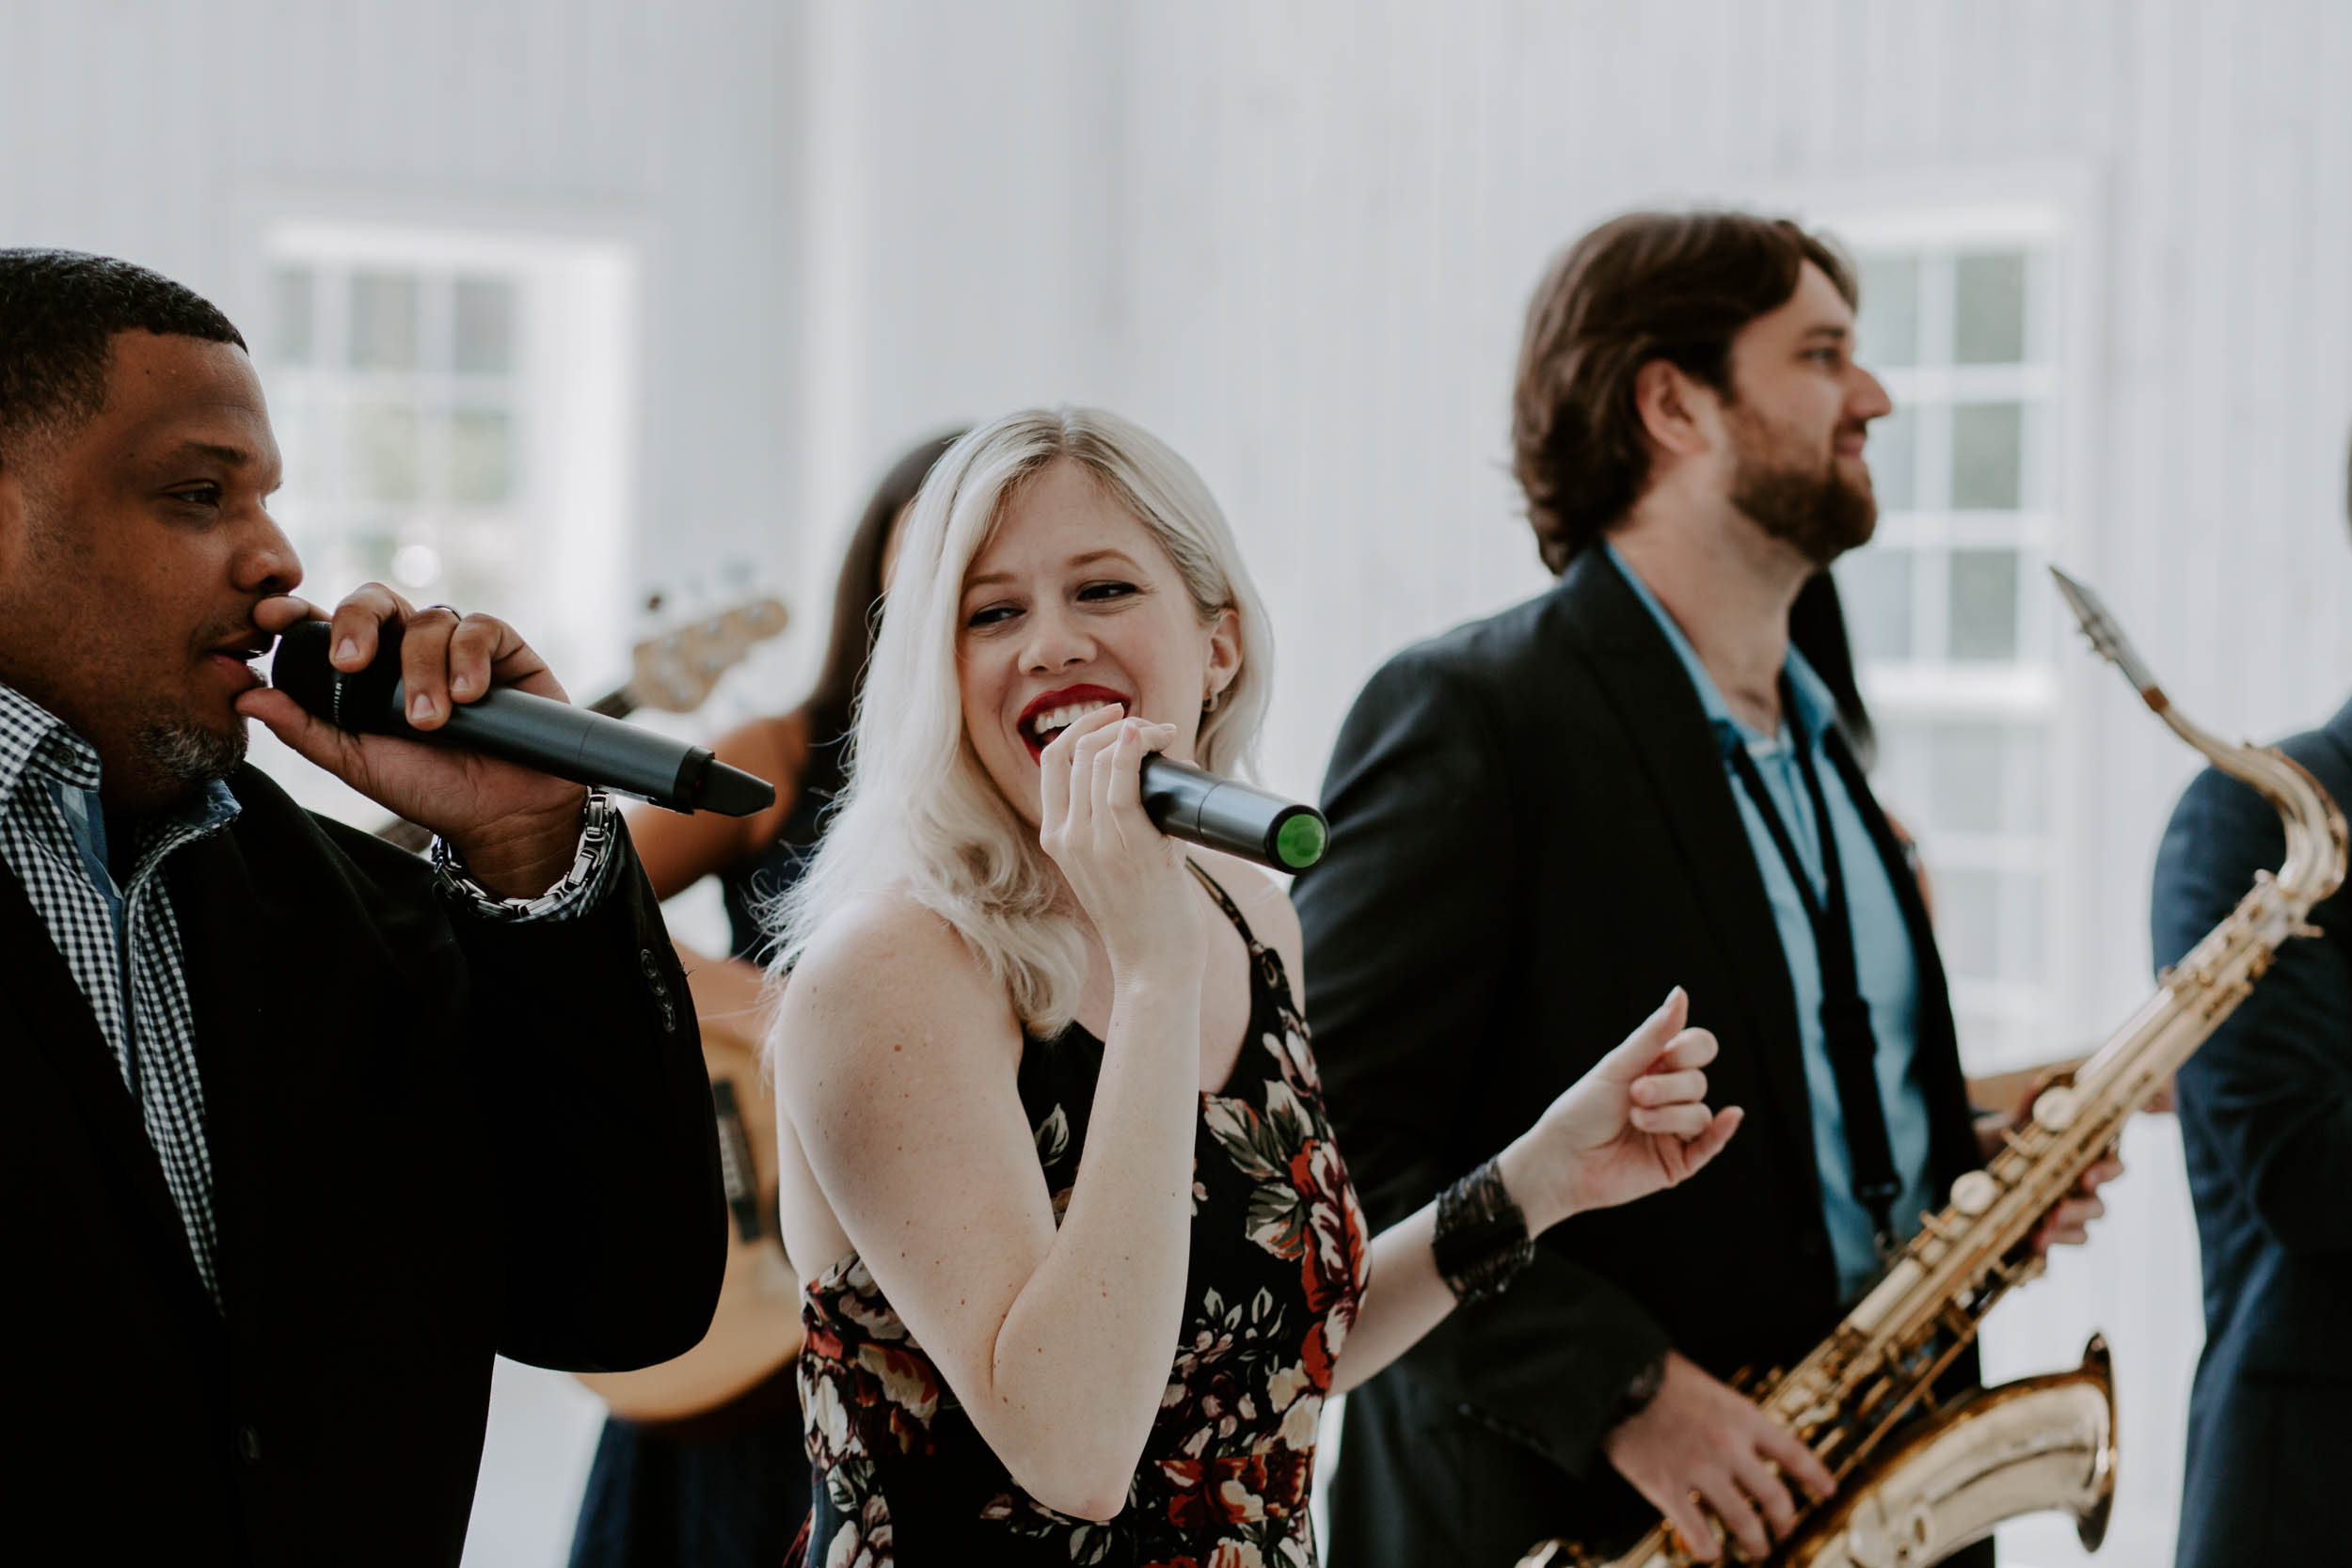 What to Look for in a Wedding DJ or Band